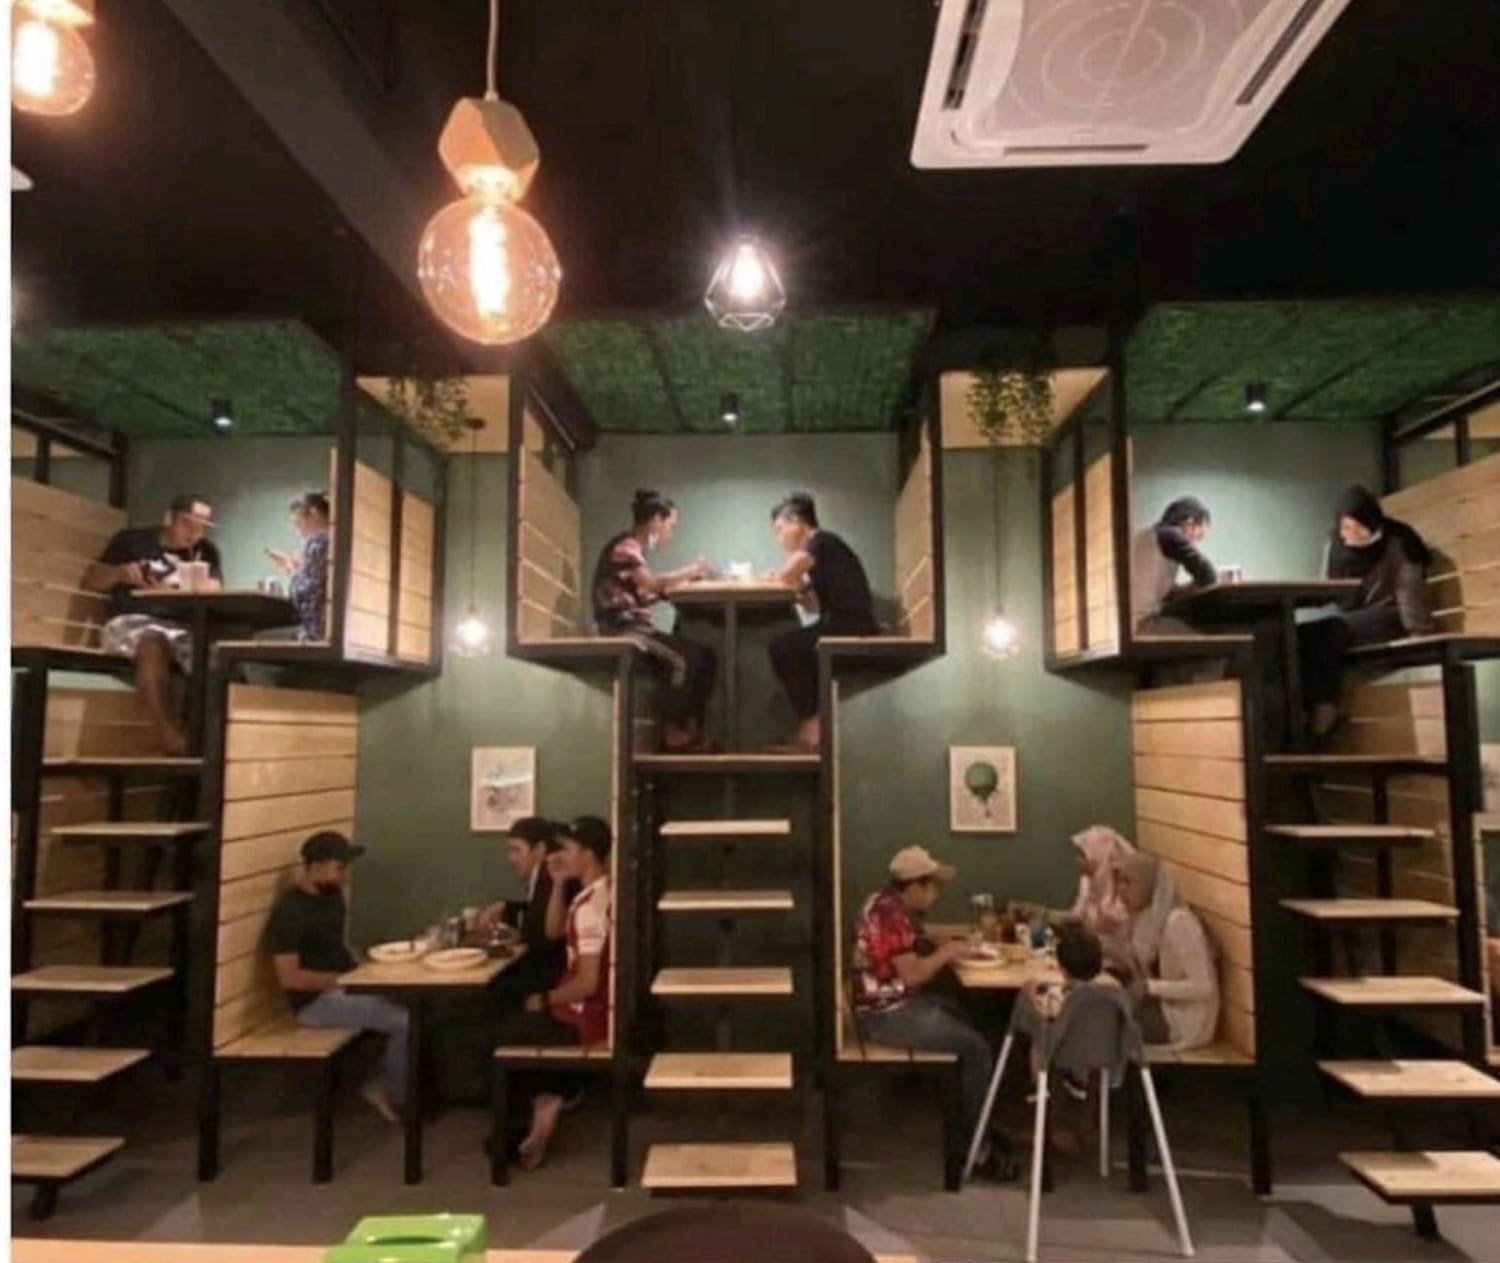 Stacked seating at a restaurant